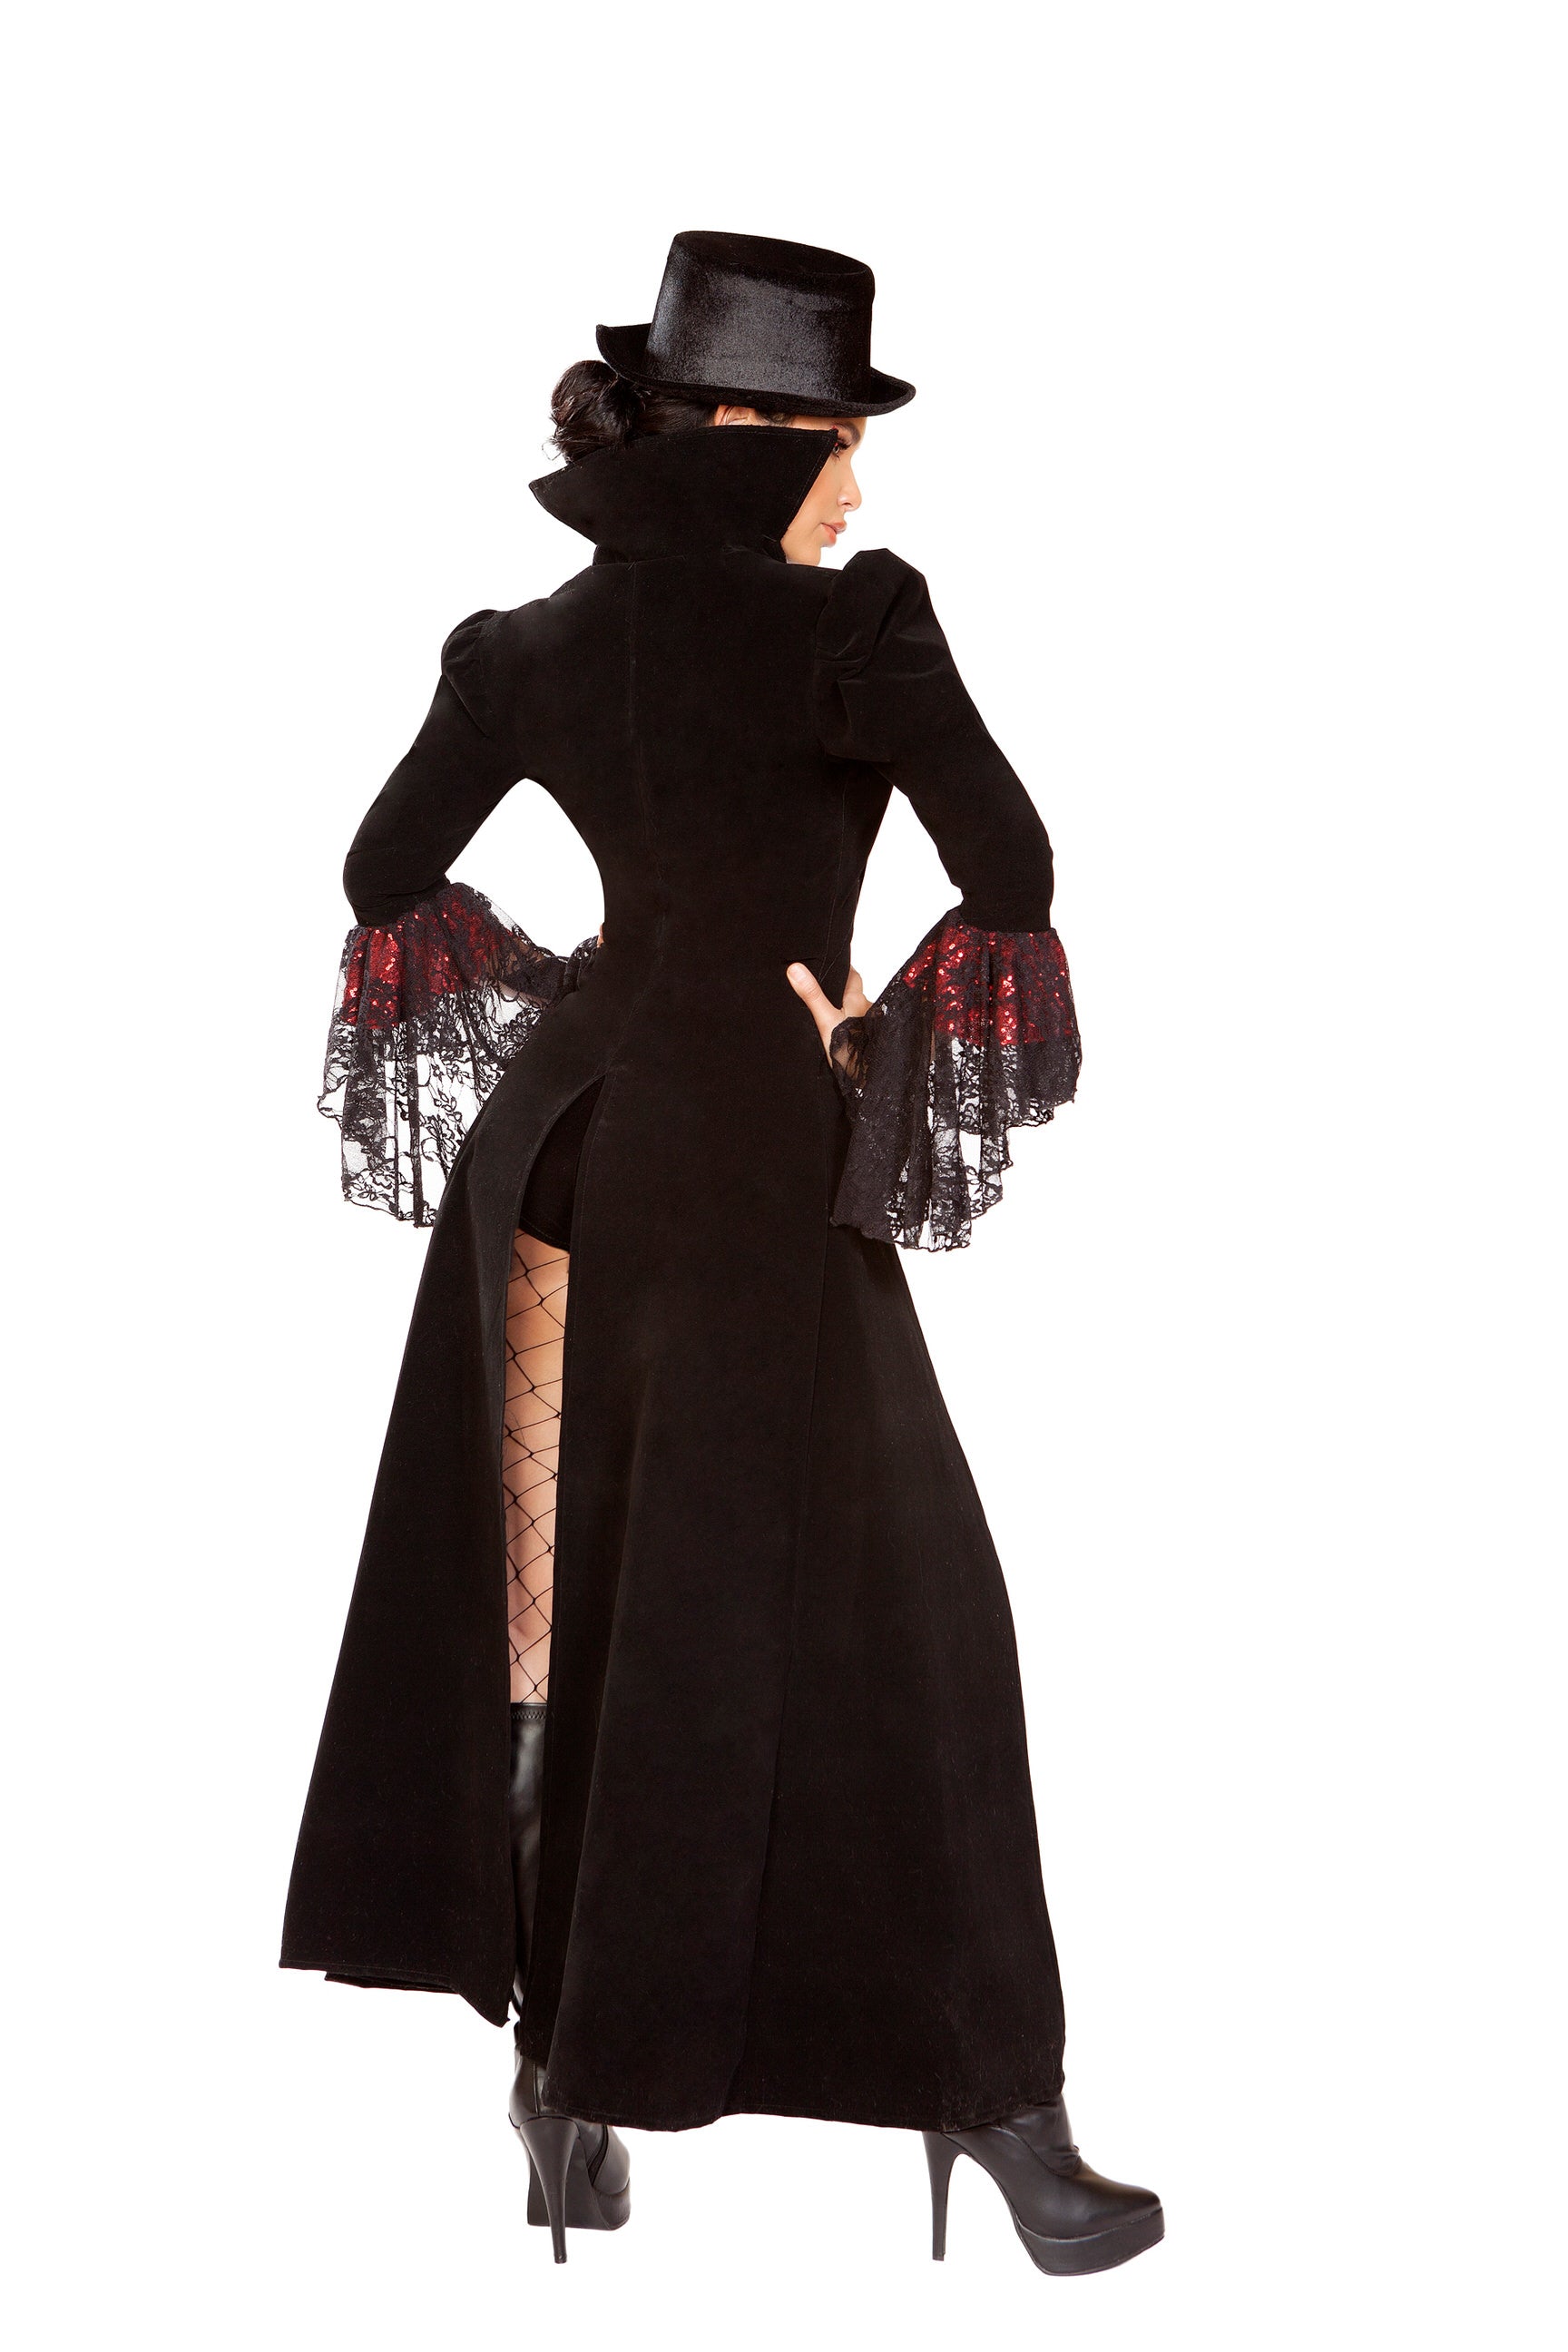 The Lusty Vampire Costume by ROMA in Size S, M, or L